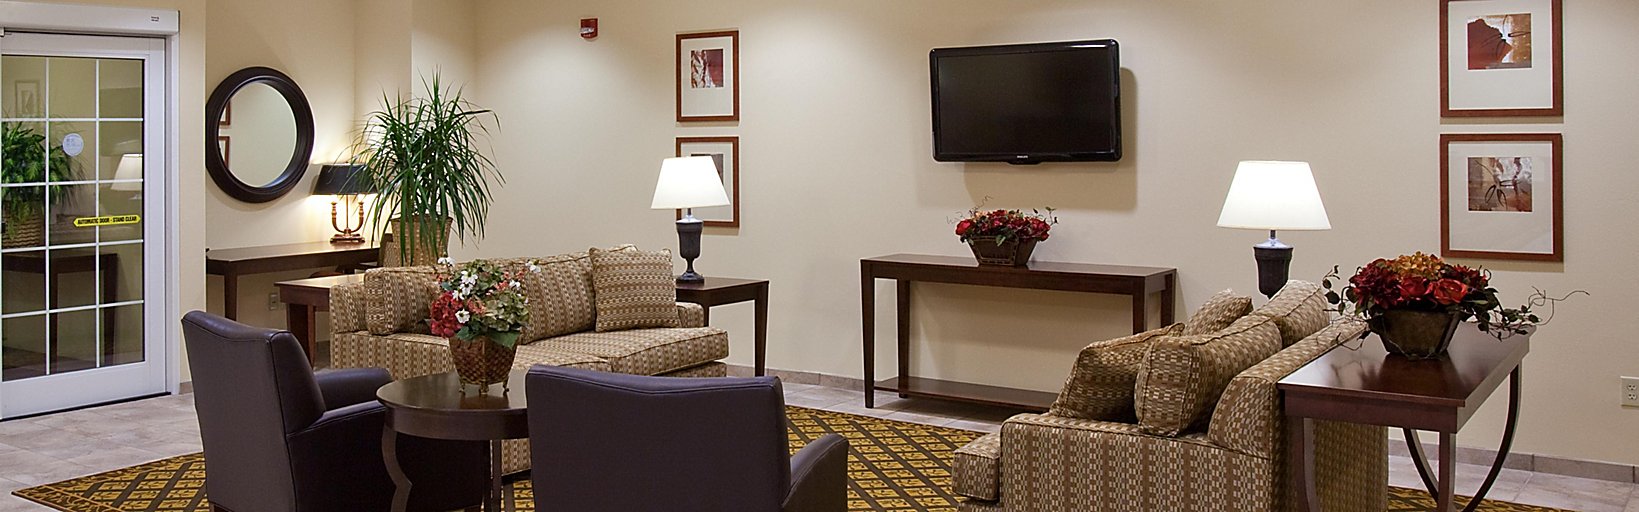 Candlewood Suites Minot Book Your Stay In Minot